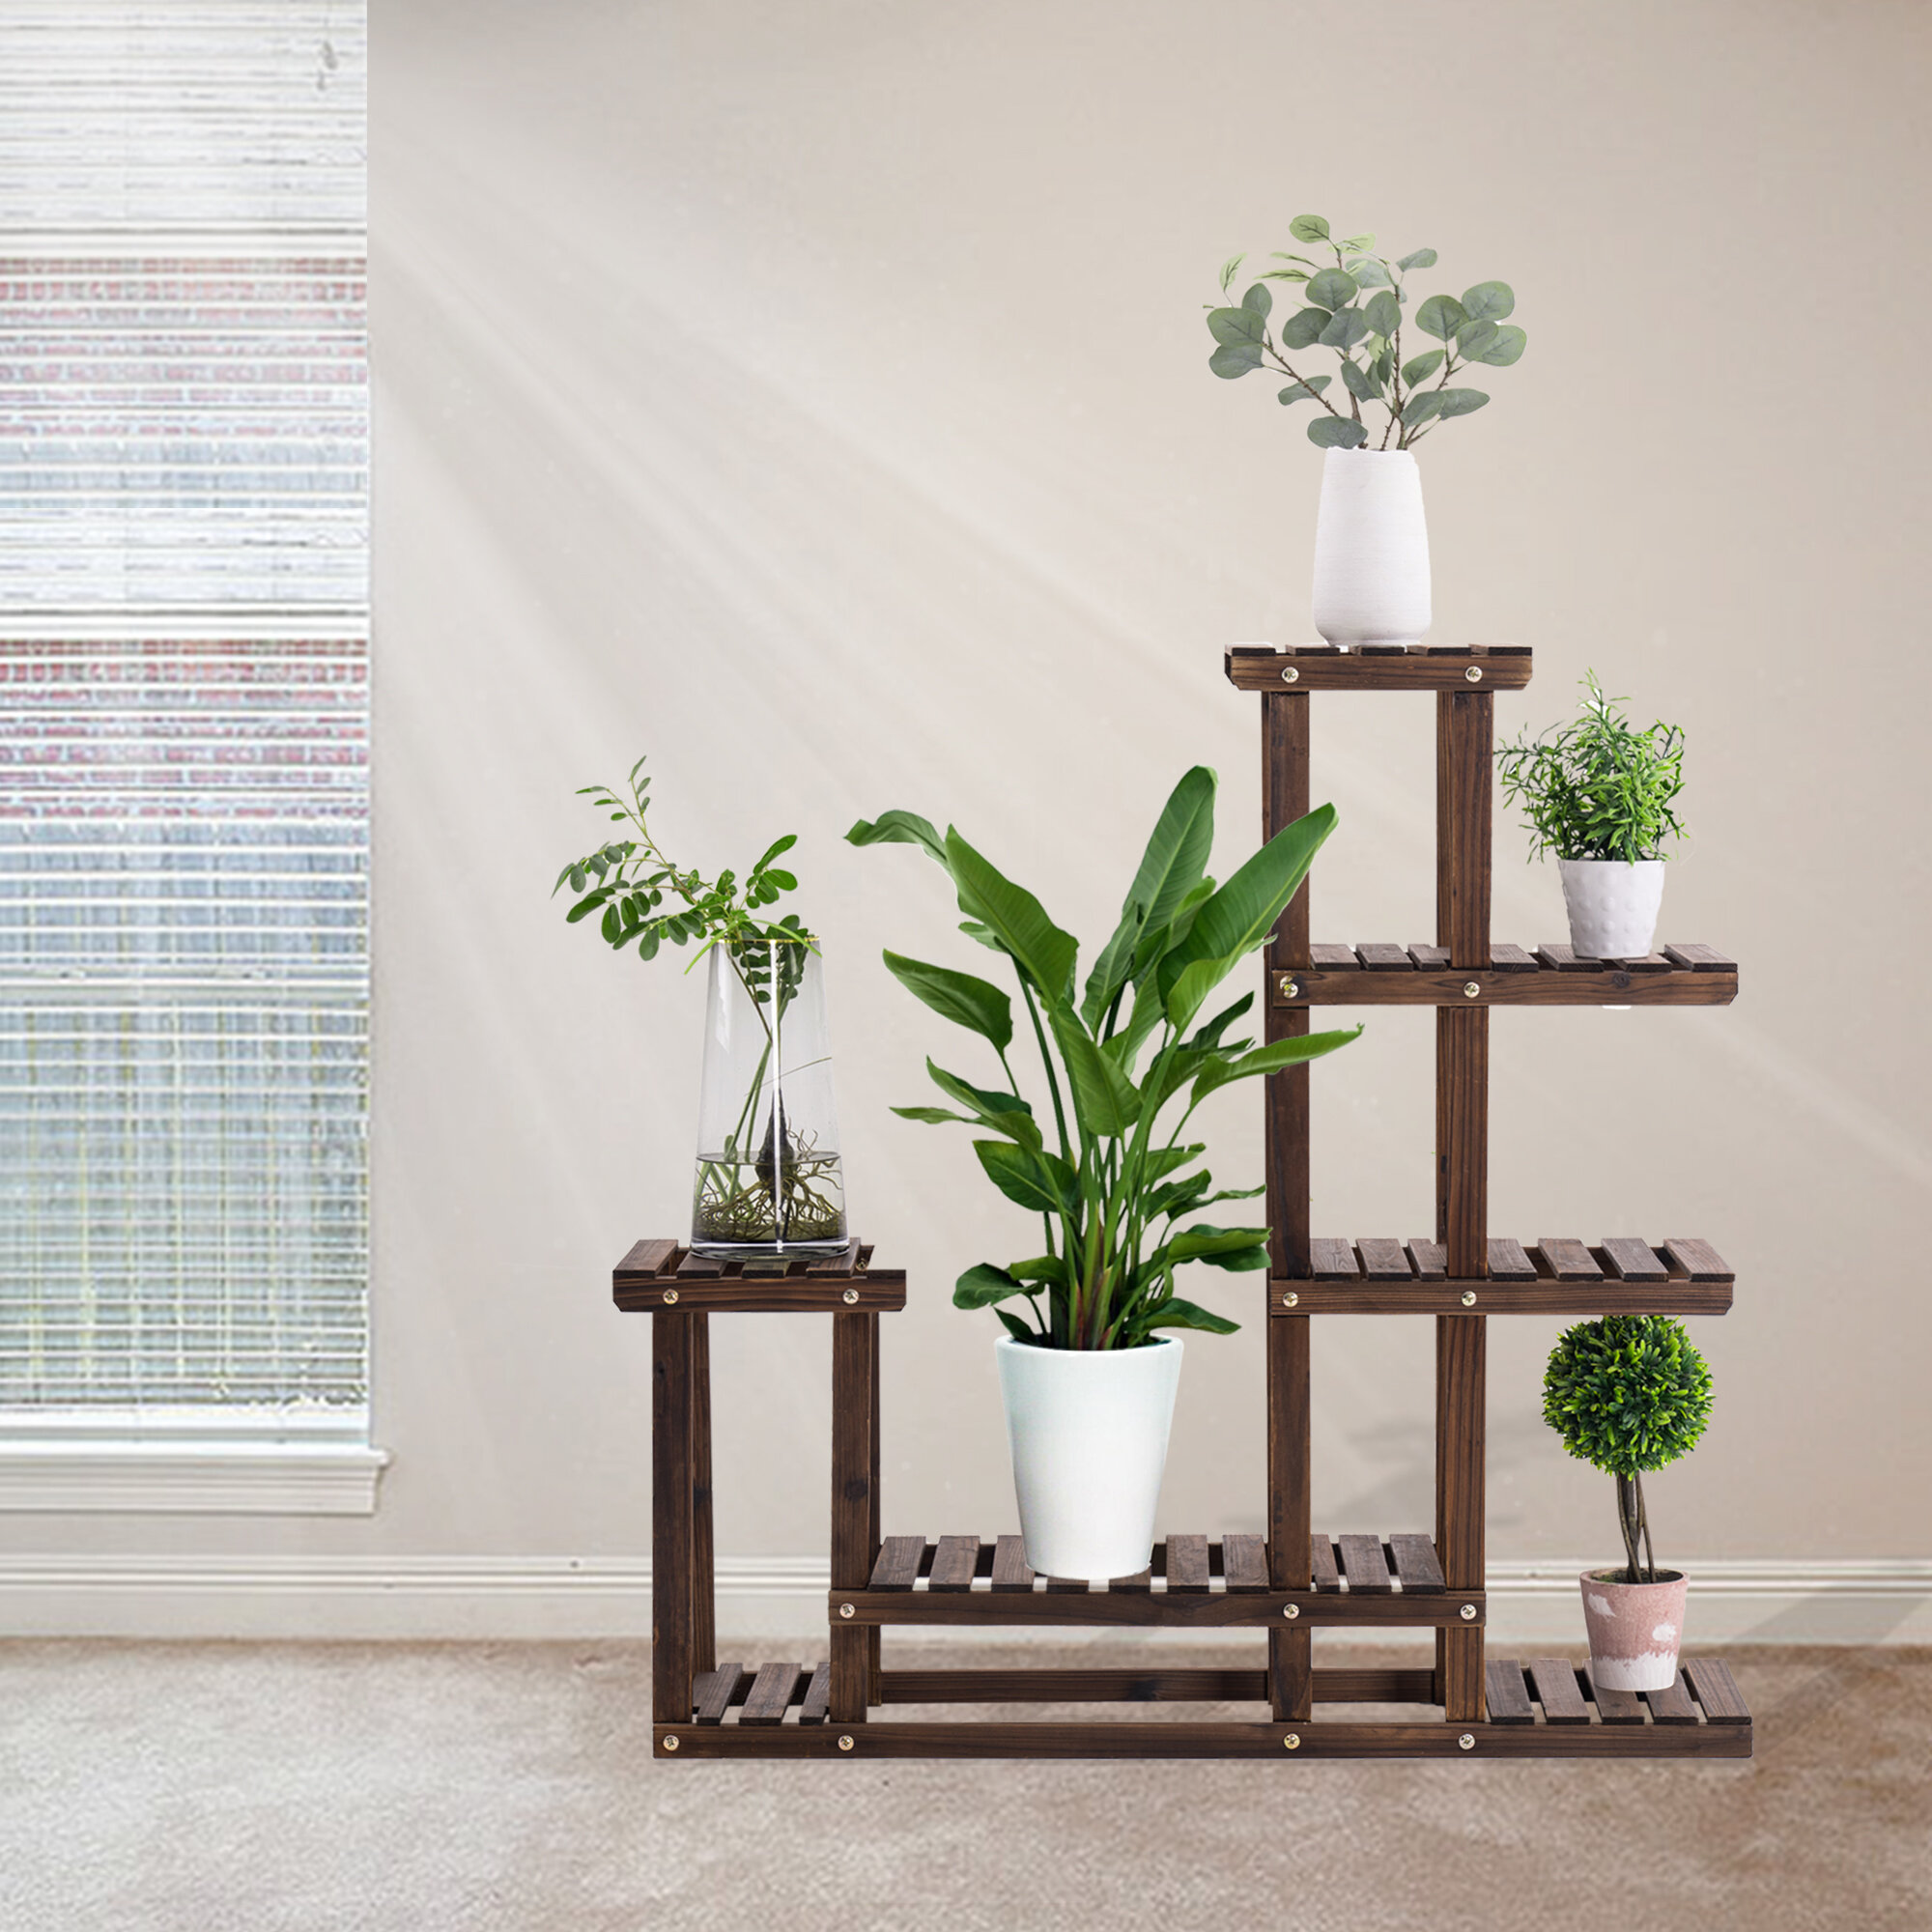 Details about   52" Tall Multi Potted Carbonized Wood Plant Stand Home Flower Display Rack Shelf 